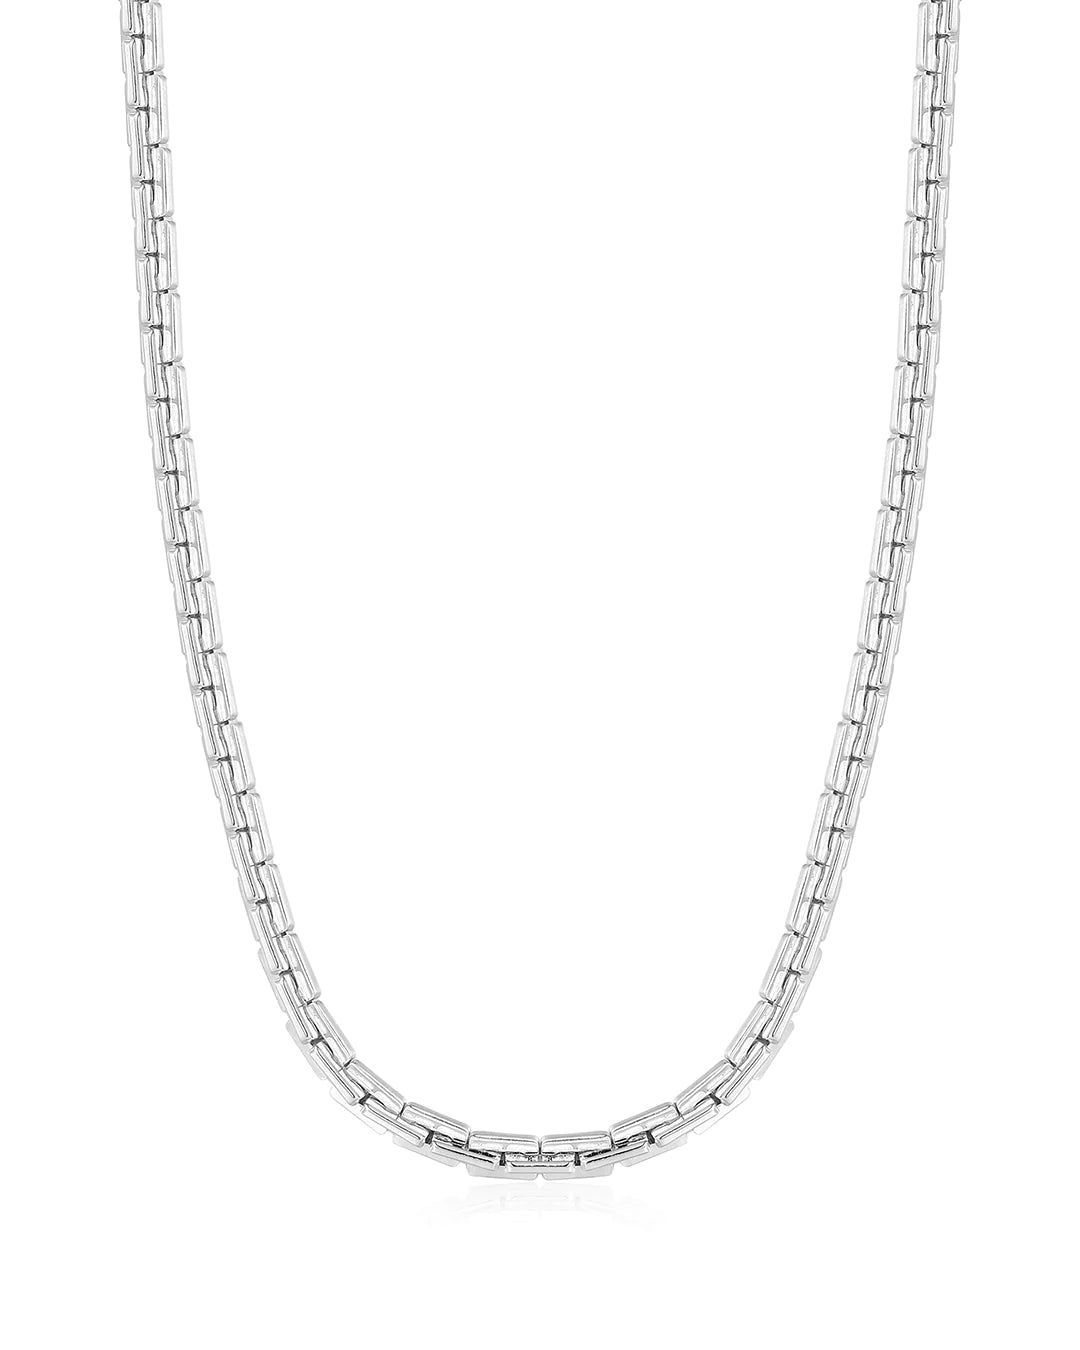 The Chloe Chain Necklace